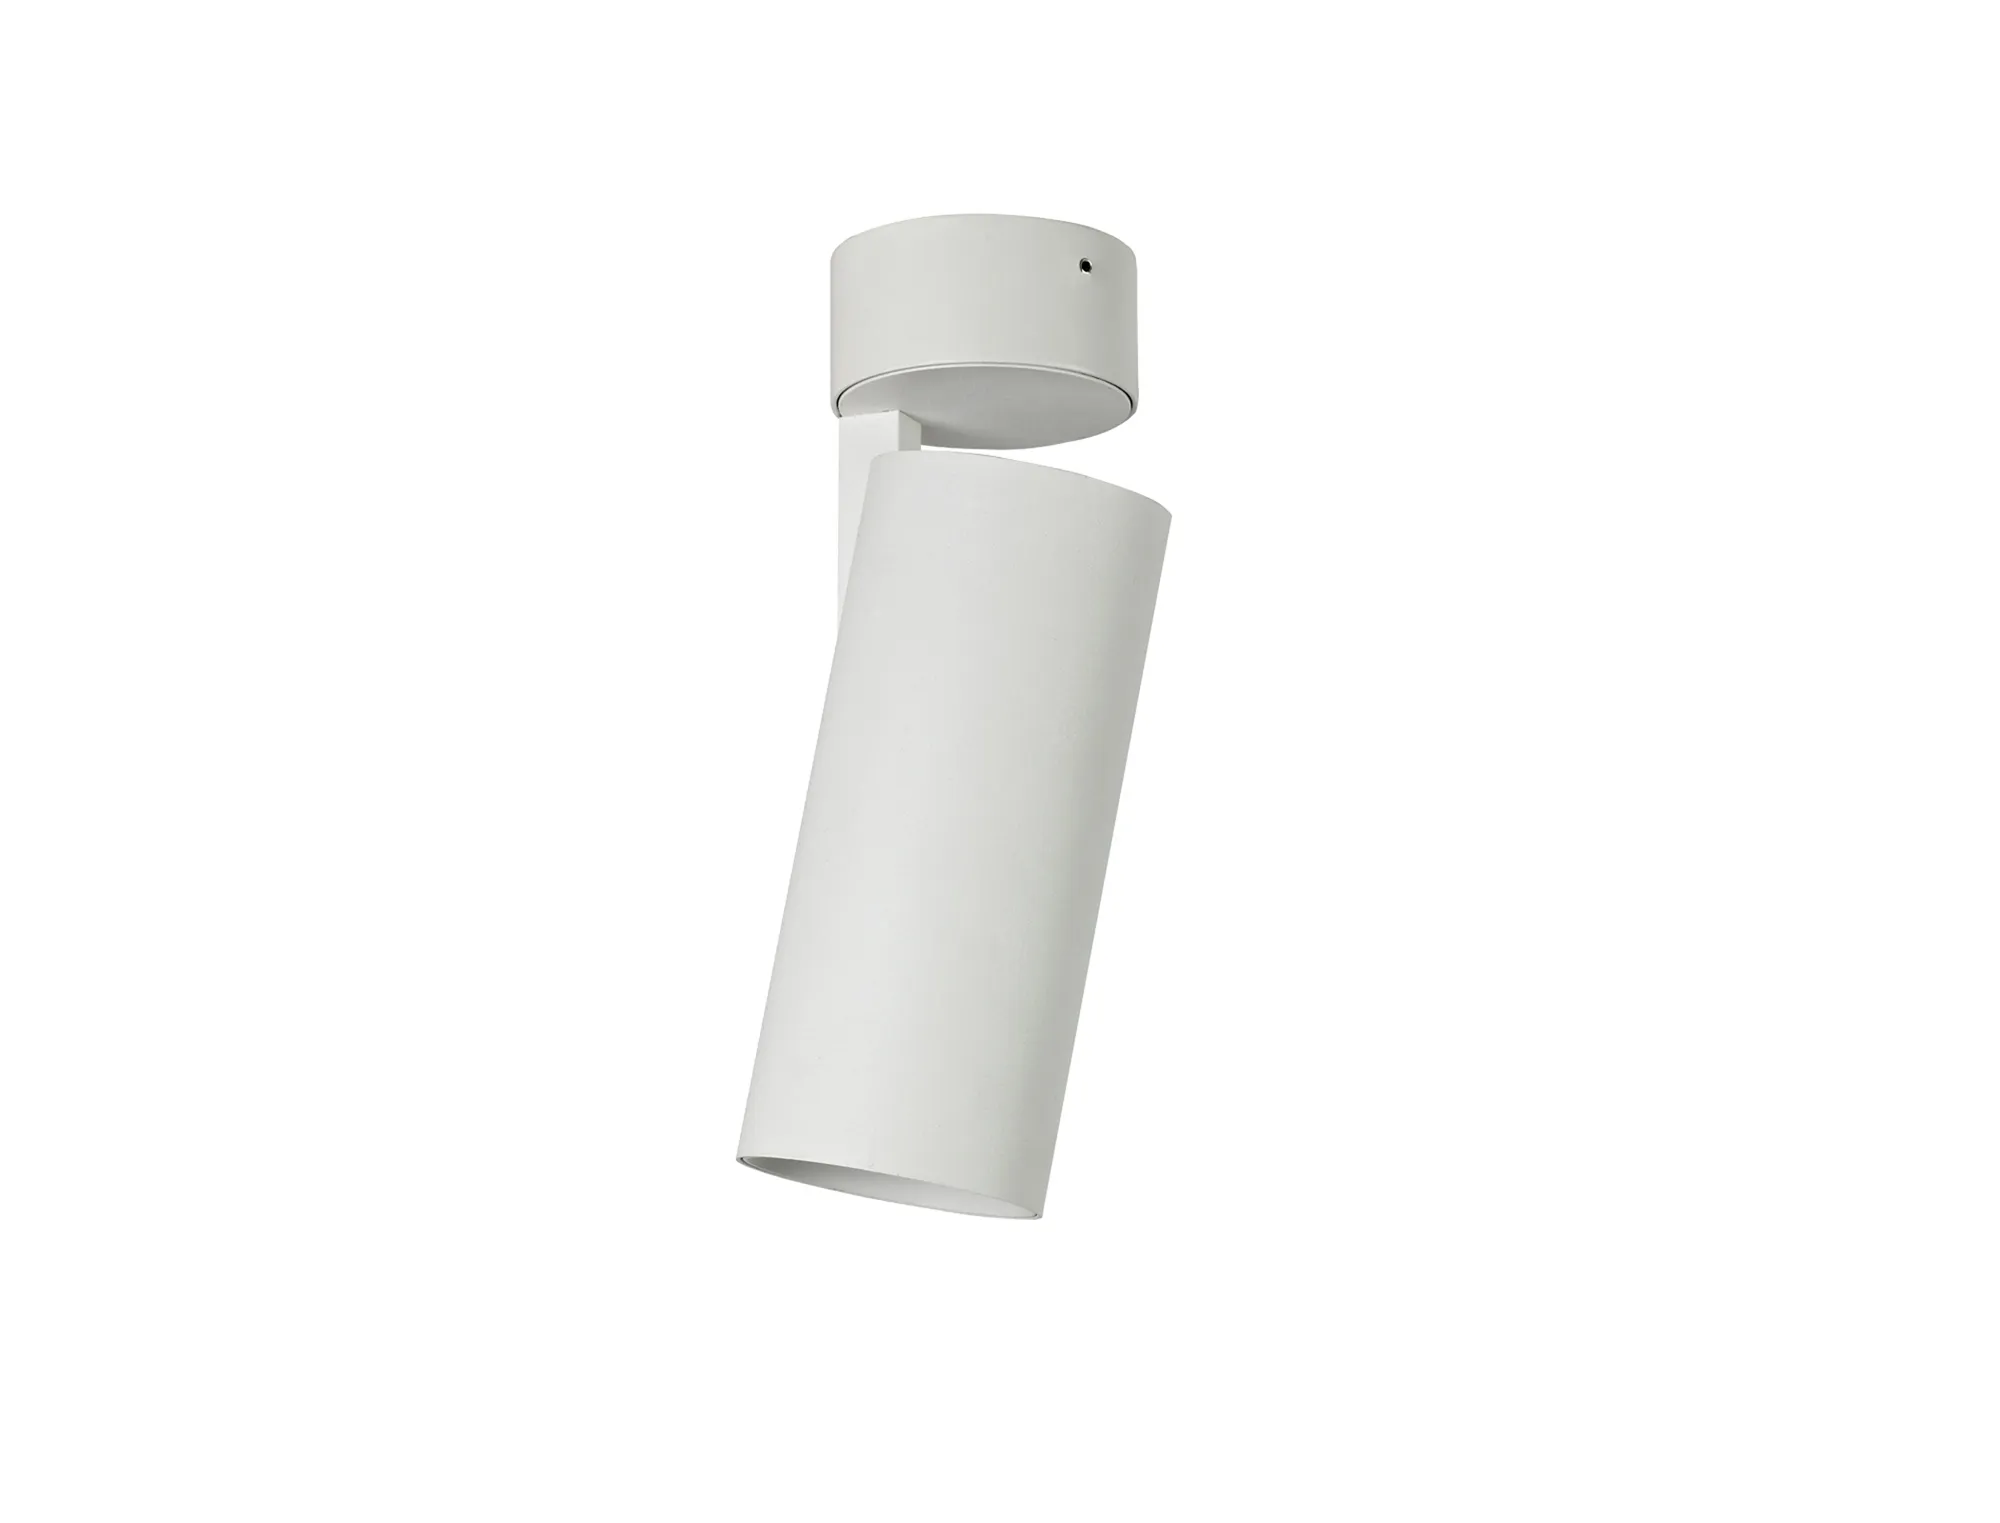 DL350158  Eos A 10 Powered By Tridonic 10W 632lm 2700K 24°; White & White; Surface LED Spotlight; Push Fit Fast Connector; IP20; 5yrs Warranty